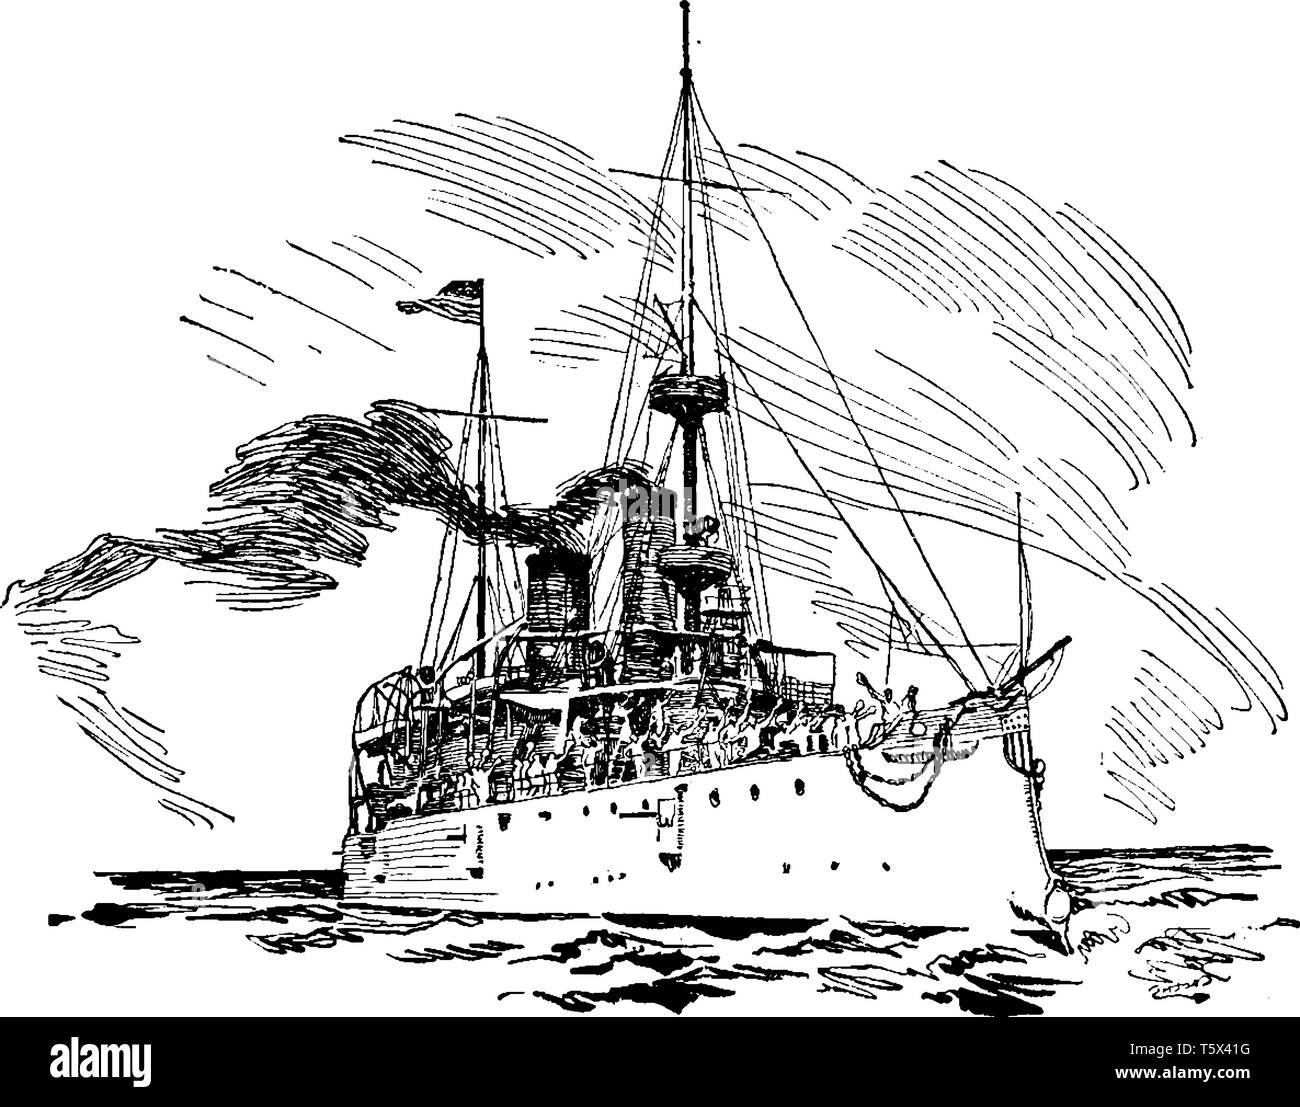 United States Protected Cruiser USS Olympia was a protected cruiser in the United States Navy during the Spanish American War, vintage line drawing or Stock Vector